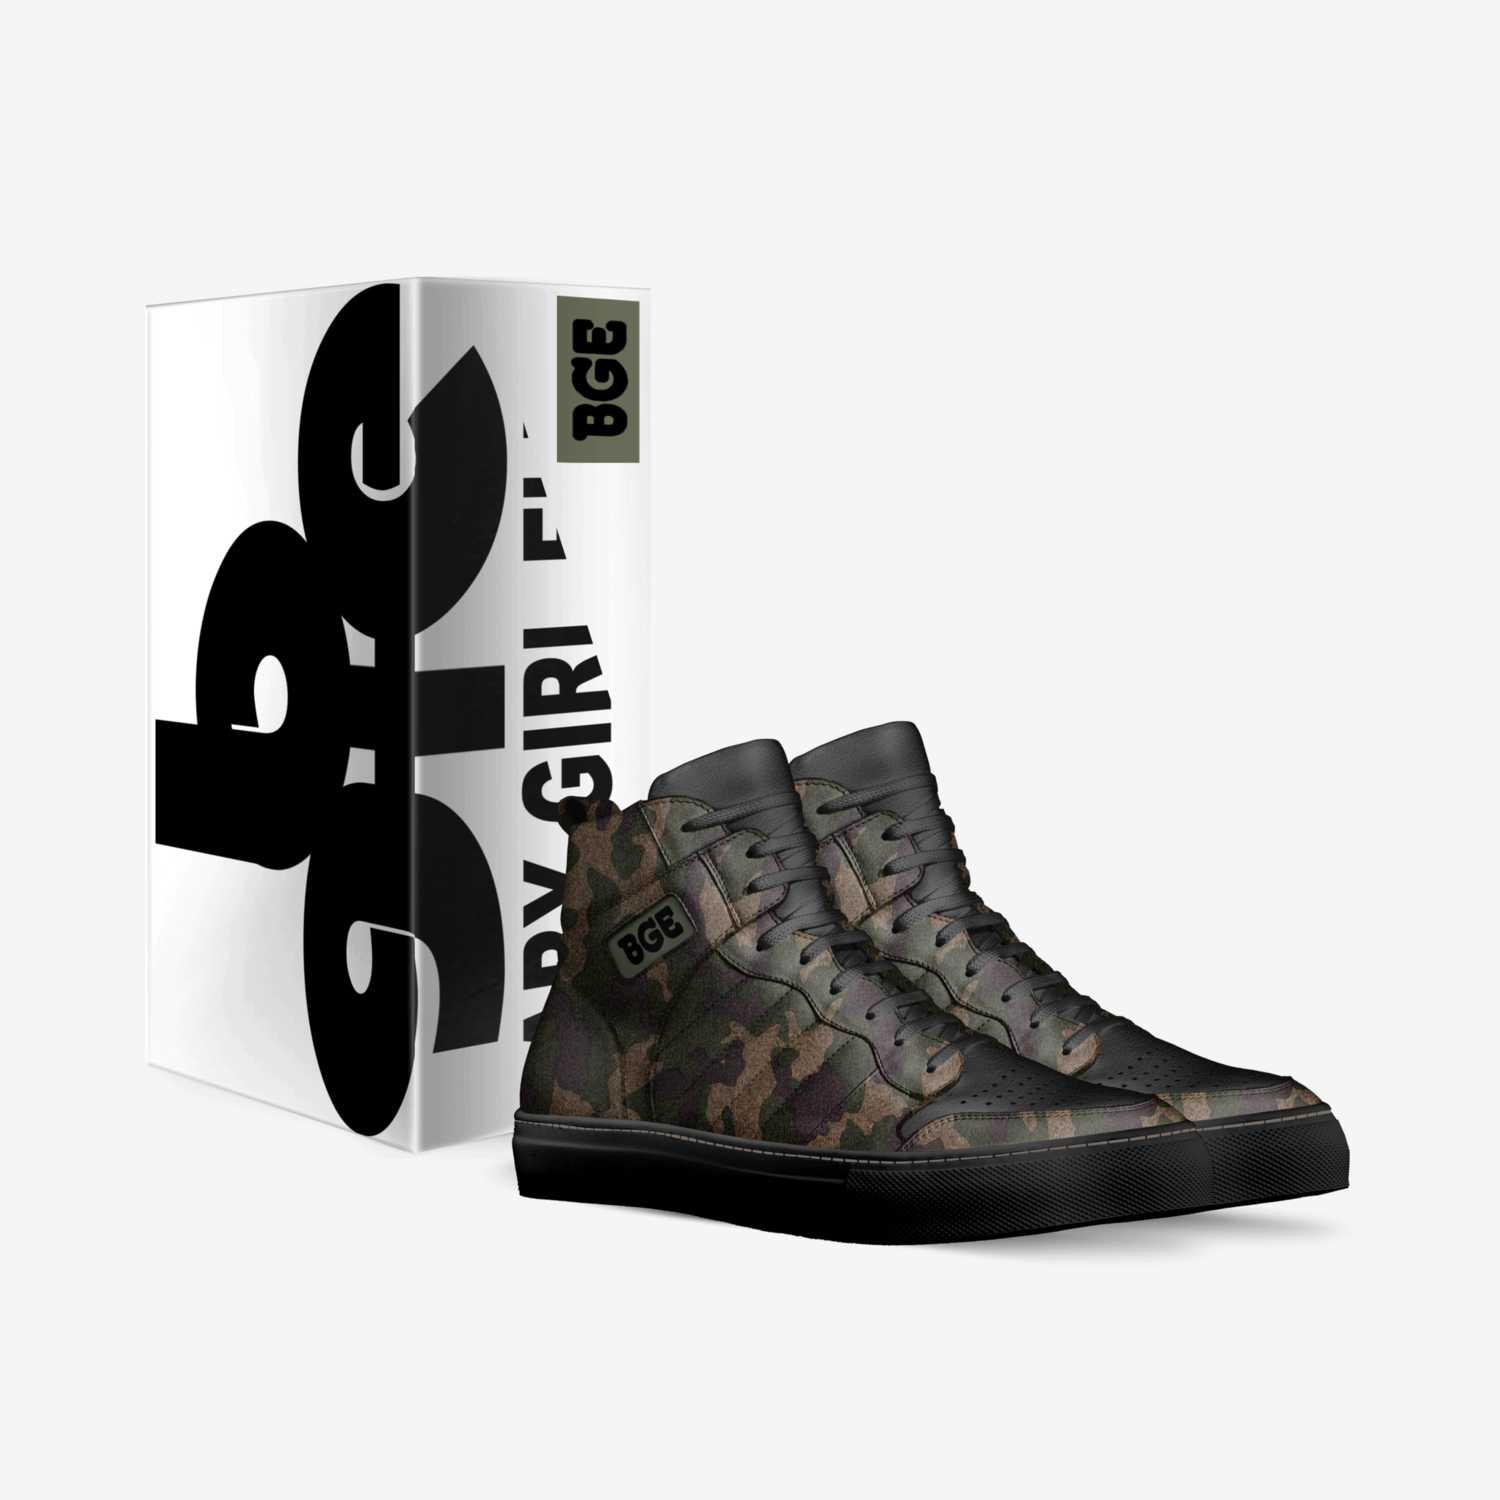 Soldier SJI Salto custom made in Italy shoes by Baby-girl Elite | Box view